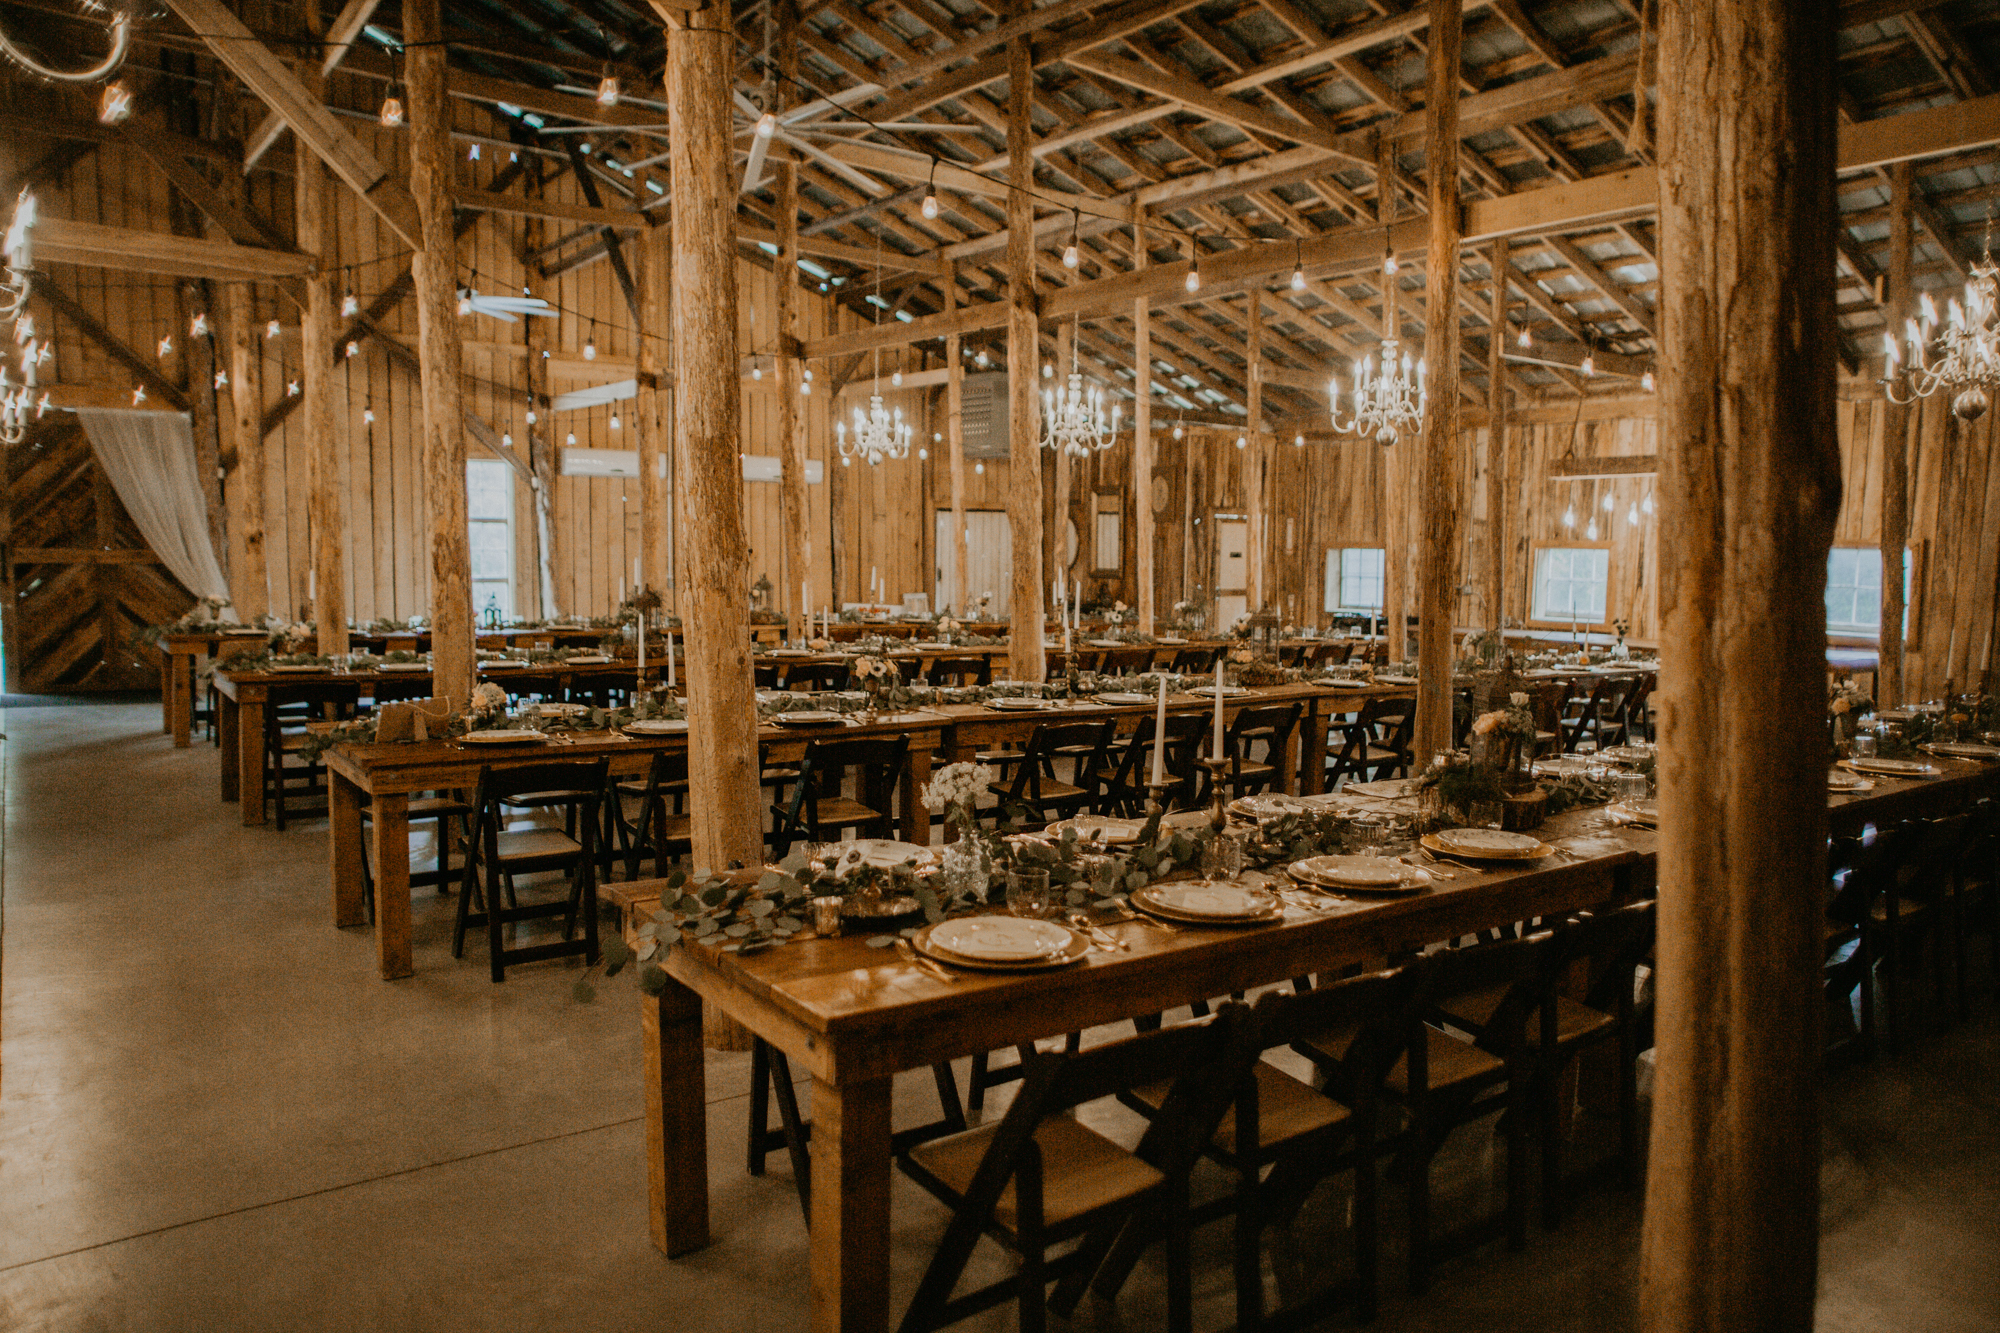 Meadow Hill Farm is featured as one of the Most Beautiful Wedding Venues in Tennessee on Looks Like Film.